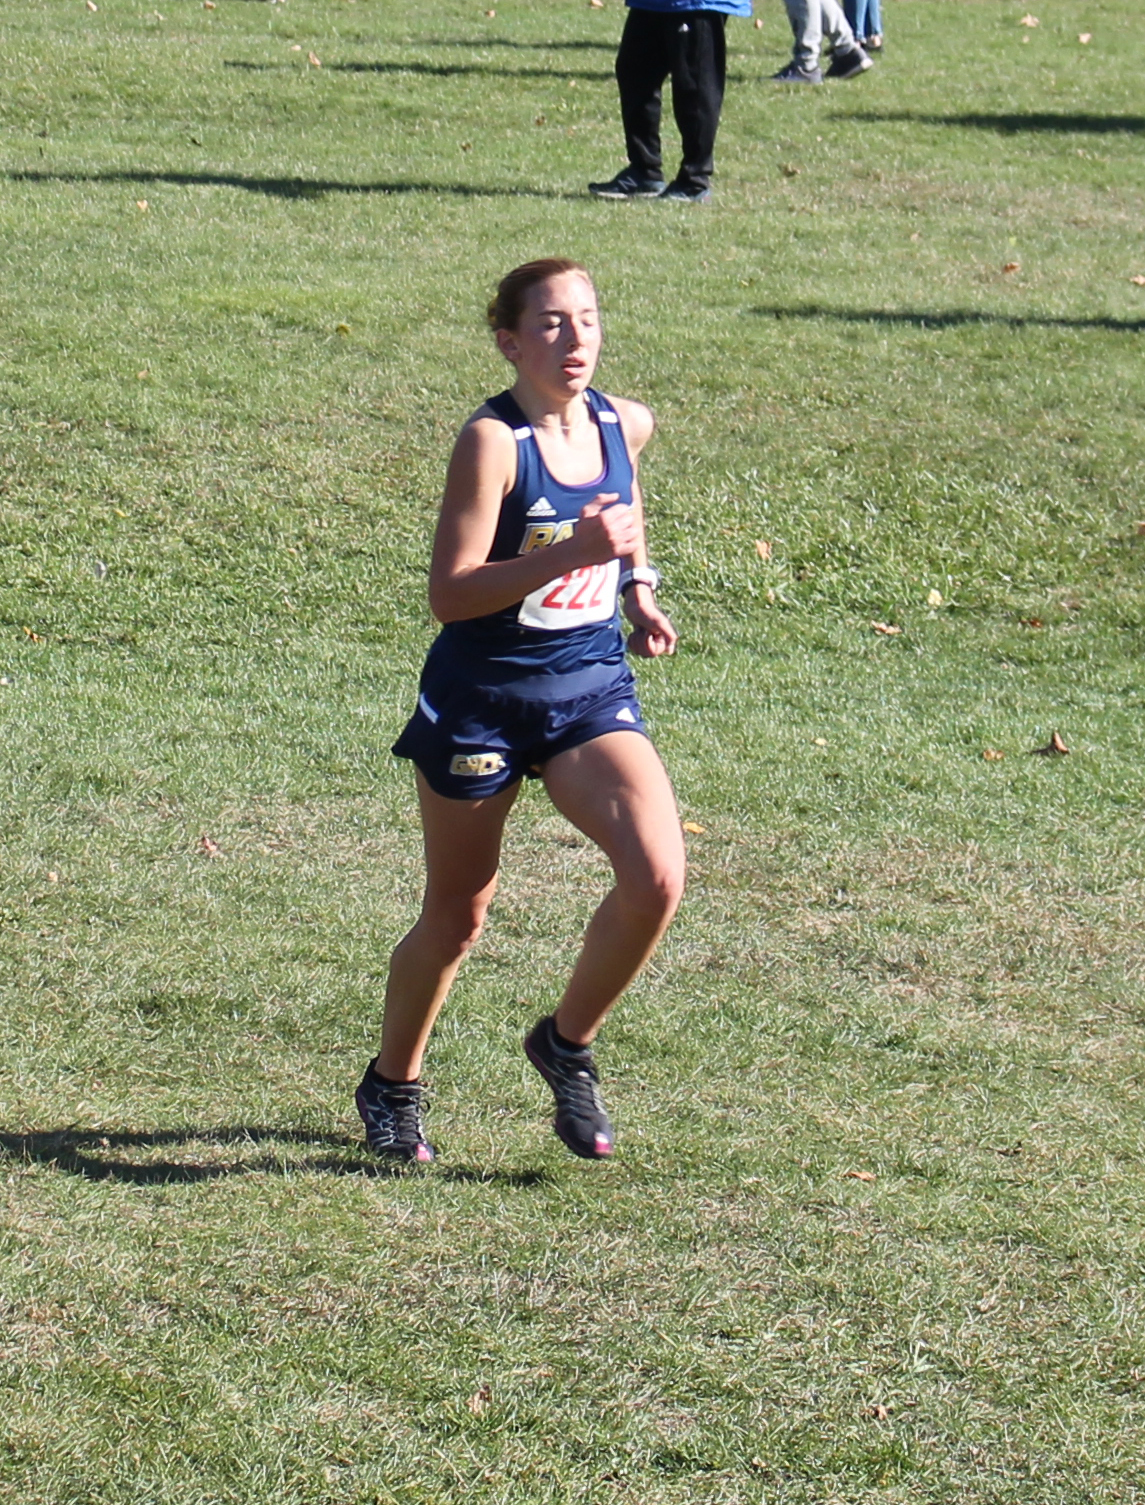 Audrey Meyering of Grand Rapids Community College wins the NJCAA Region XII Division II women's cross country championship.